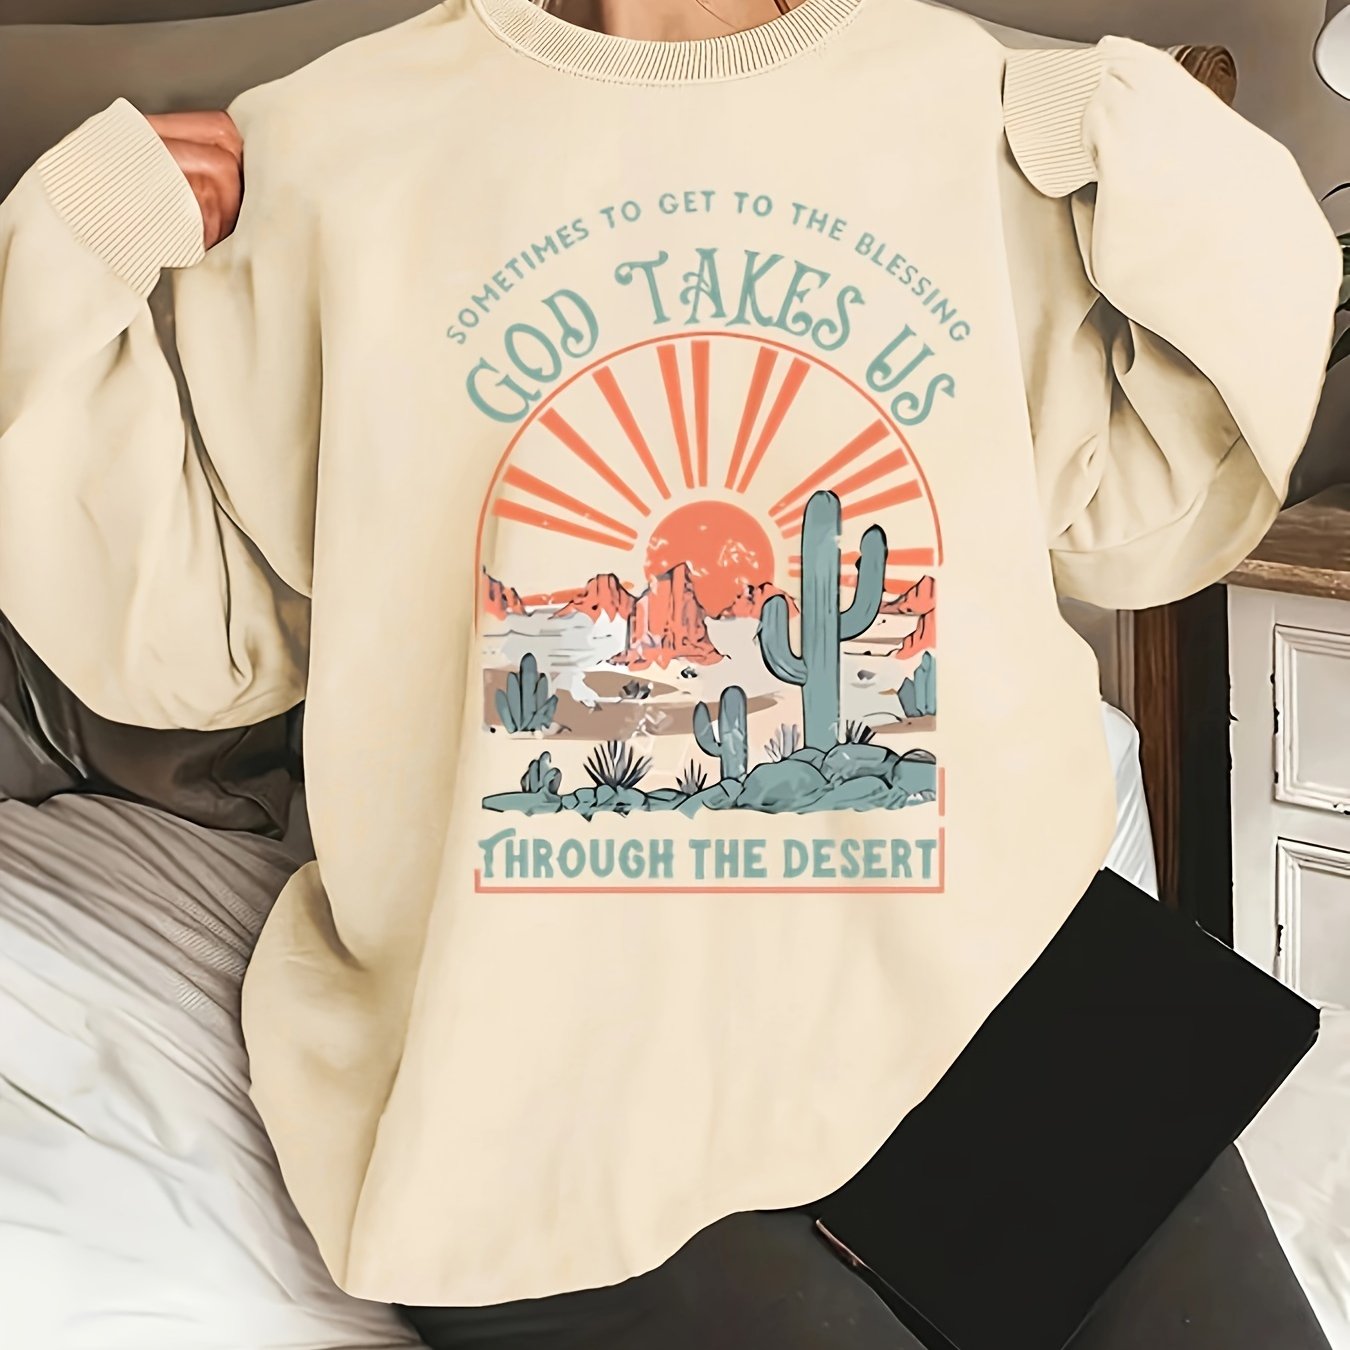 Sometimes To Get Through The Blessing God Takes Us Through The Desert Plus Size Women's Christian Pullover Sweatshirt claimedbygoddesigns